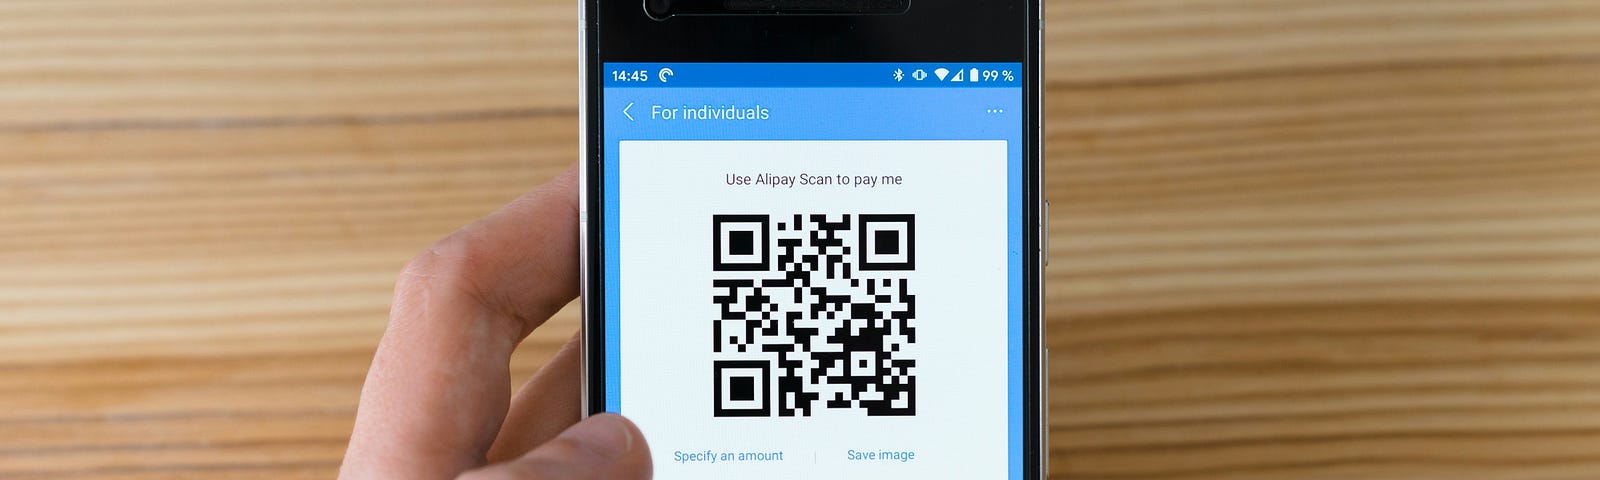 A smartphone with a QR code payment option showing on the screen.